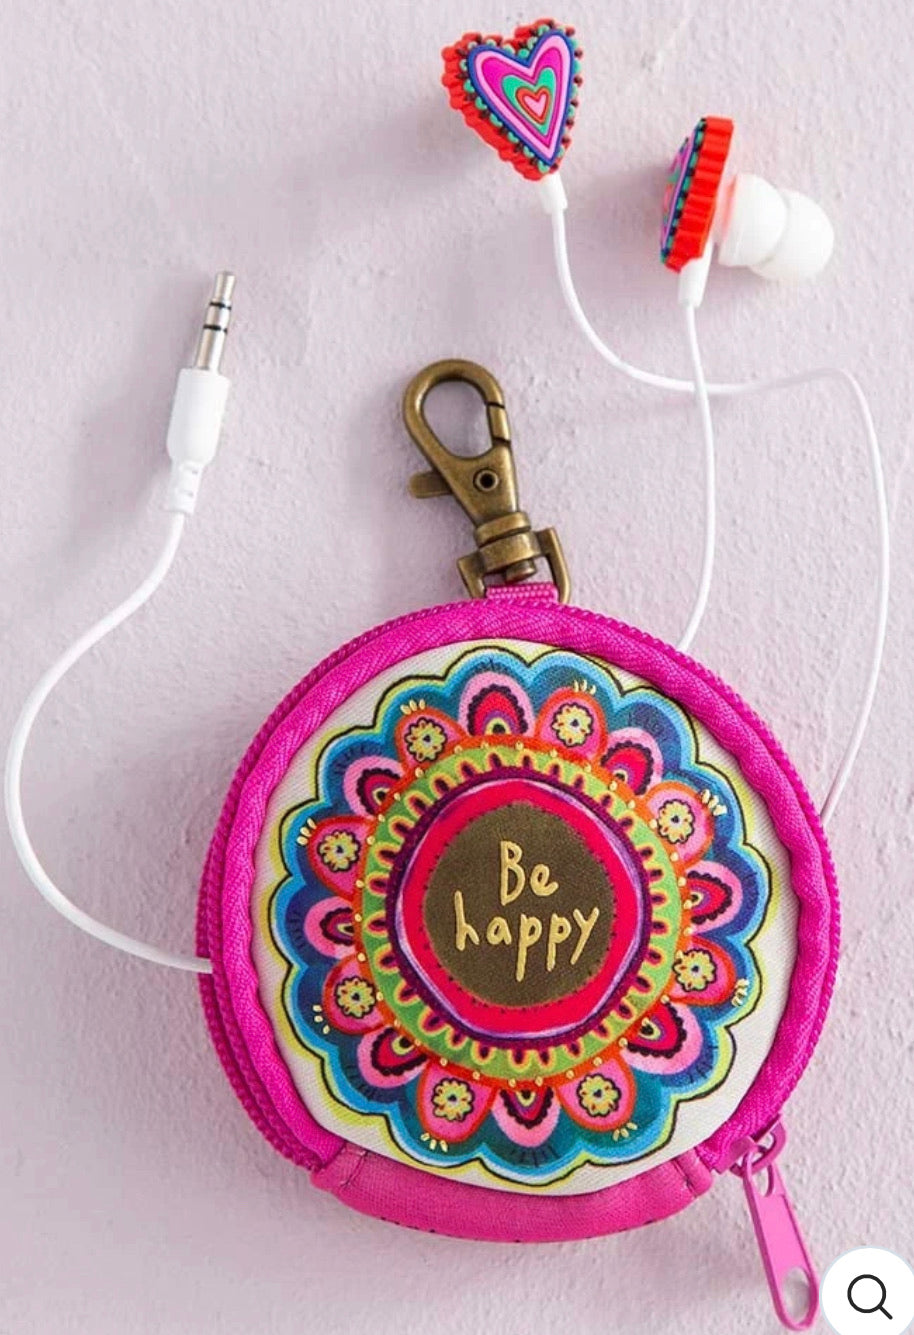 Heart Earbuds w/ Be Happy Pouch- Natural Life